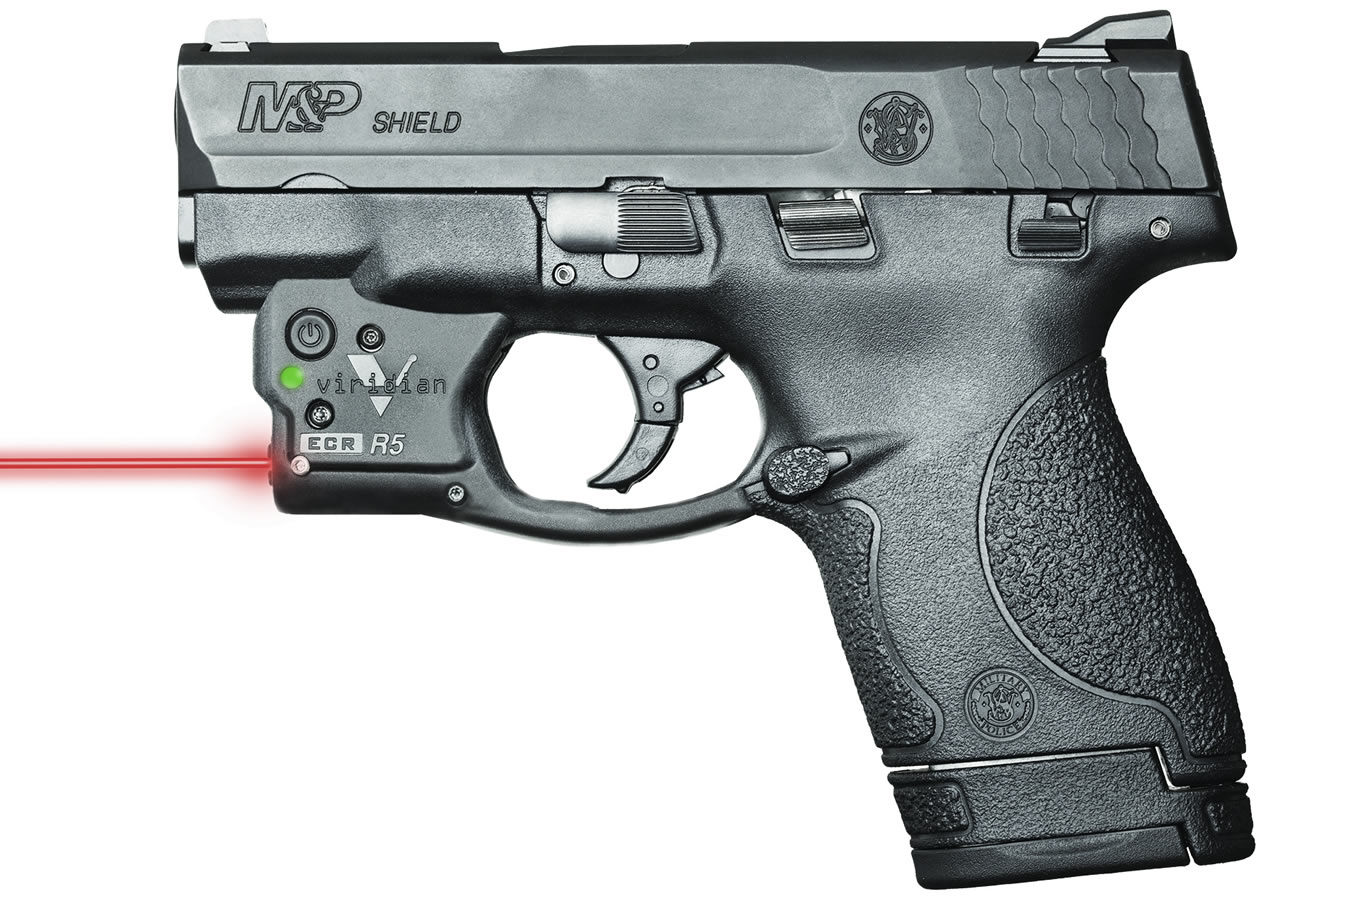 SMITH AND WESSON MP40 SHIELD 40SW PISTOL W/VIRIDIAN LASER